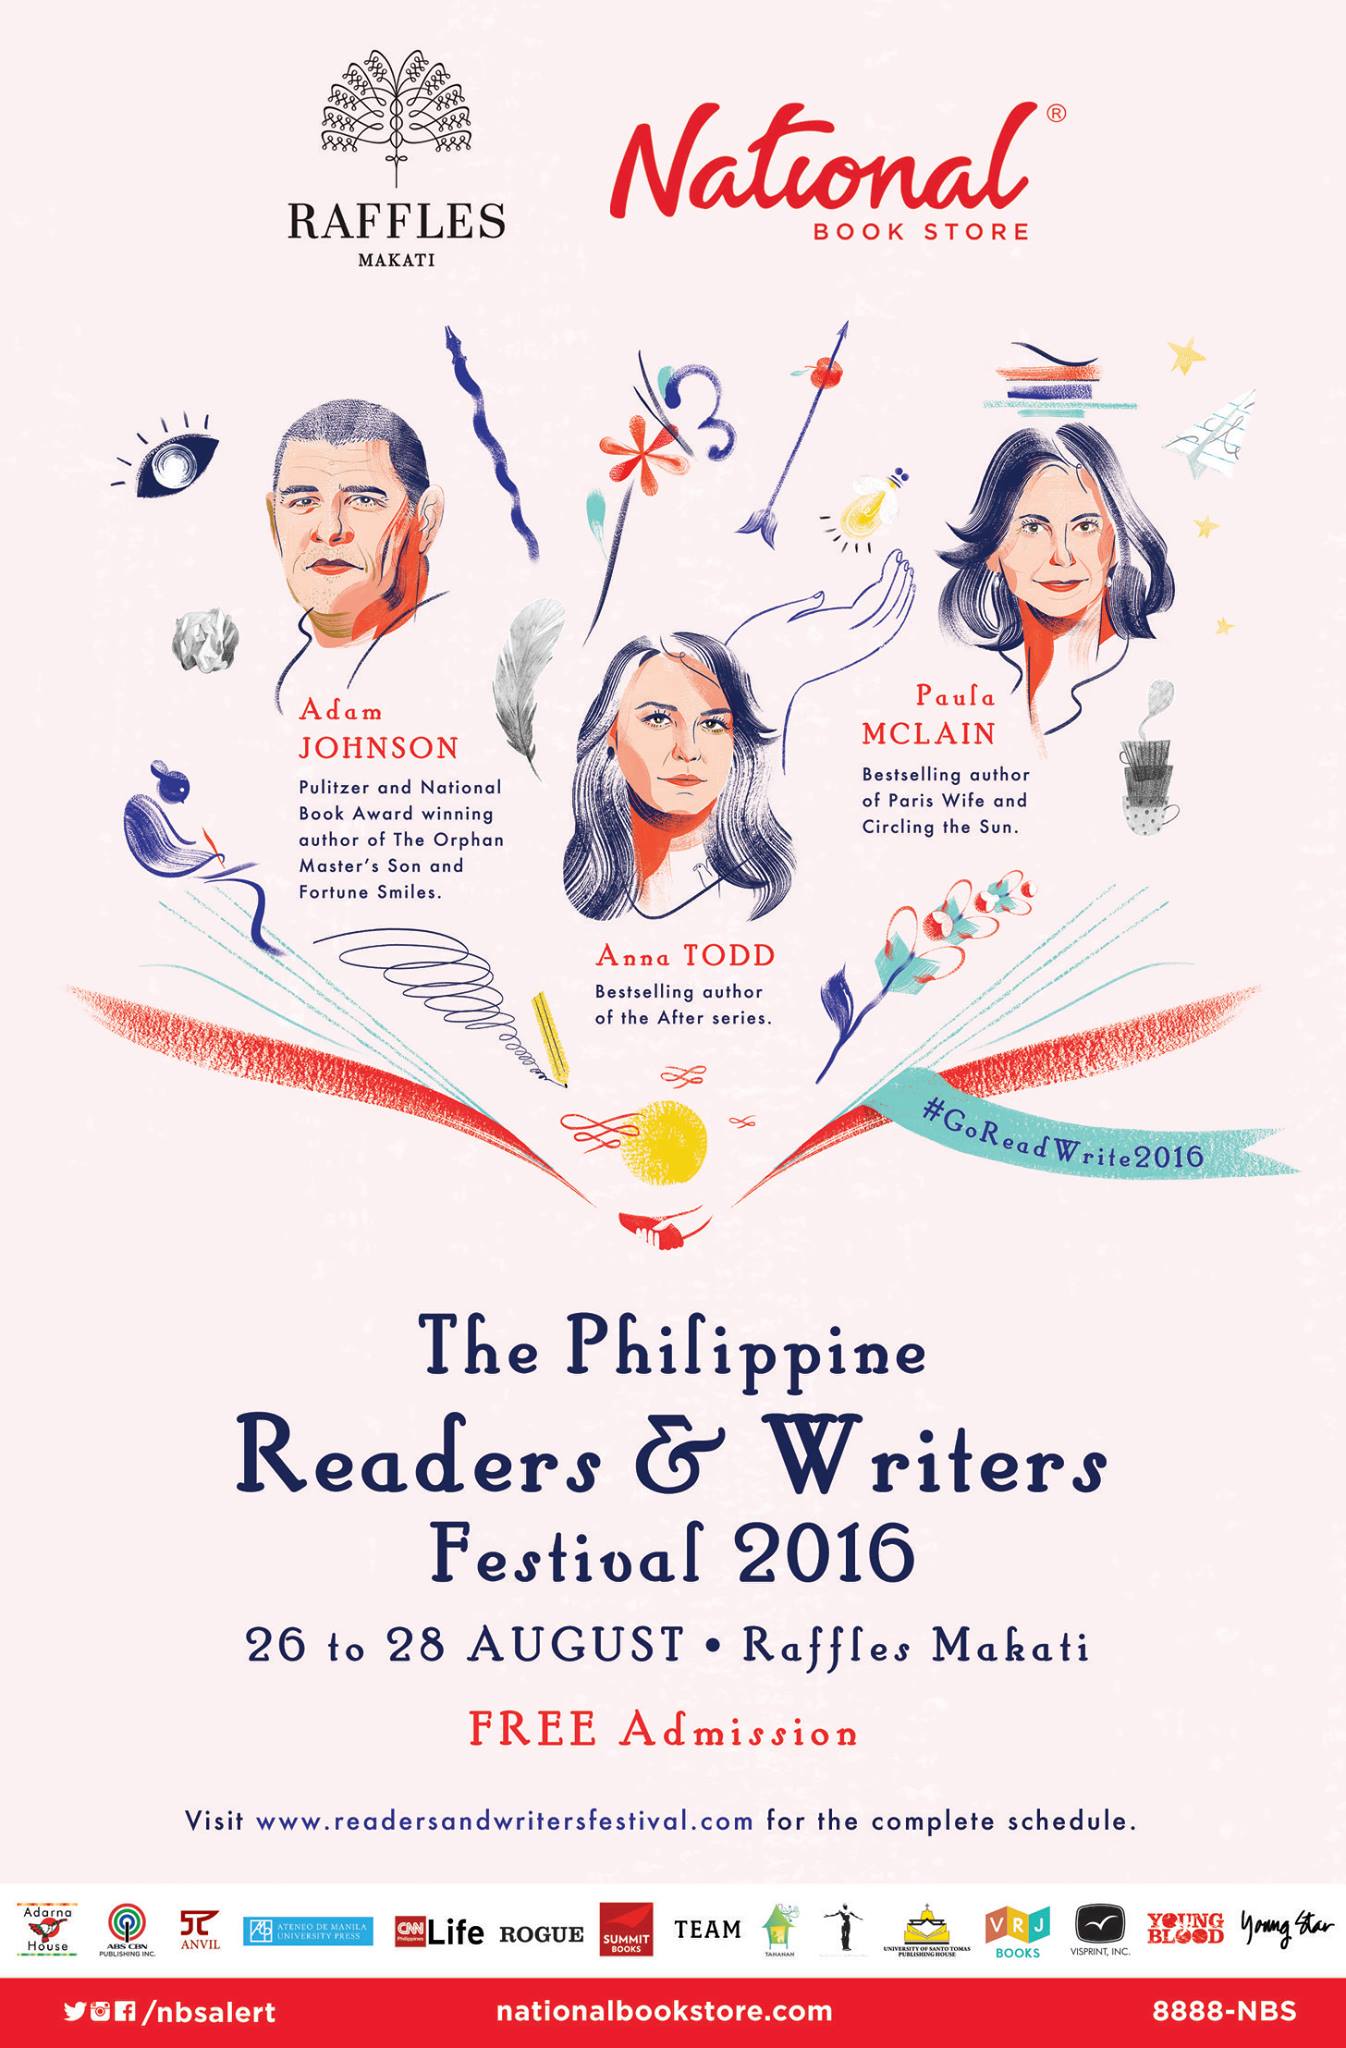 National Book Store added 2 new photos. August 20 at 8:17pm · Check out the complete ‪#‎GoReadWrite2016‬ schedule. See you all next weekend! Join National Book Store and Raffles Makati’s Philippine Readers and Writers Festival featuring Pulitzer Prize award winning author Adam Johnson and bestselling authors Paula McLain and Anna Todd Books from August 26 to 28, 2016 at the Raffles Makati. Admission is free! Attend three days of book signings, discussions, and panels about books, literature, and culture from top Filipino writers and artists. The Paula McLain and Adam Johnson talk and book signing will be on August 27 at 1 p.m. and 4 p.m., respectively. The Anna Todd talk and book signing will be on August 28 at 2 p.m. All events will be held at the Raffles Makati with registration starting at 8:30 a.m. everyday. Sign up at www.readersandwritersfestival.com to receive the latest updates on the events. Tag #GoReadWrite2016 to join the discussion. RSVP to the event: http://bit.ly/PRWF2016.